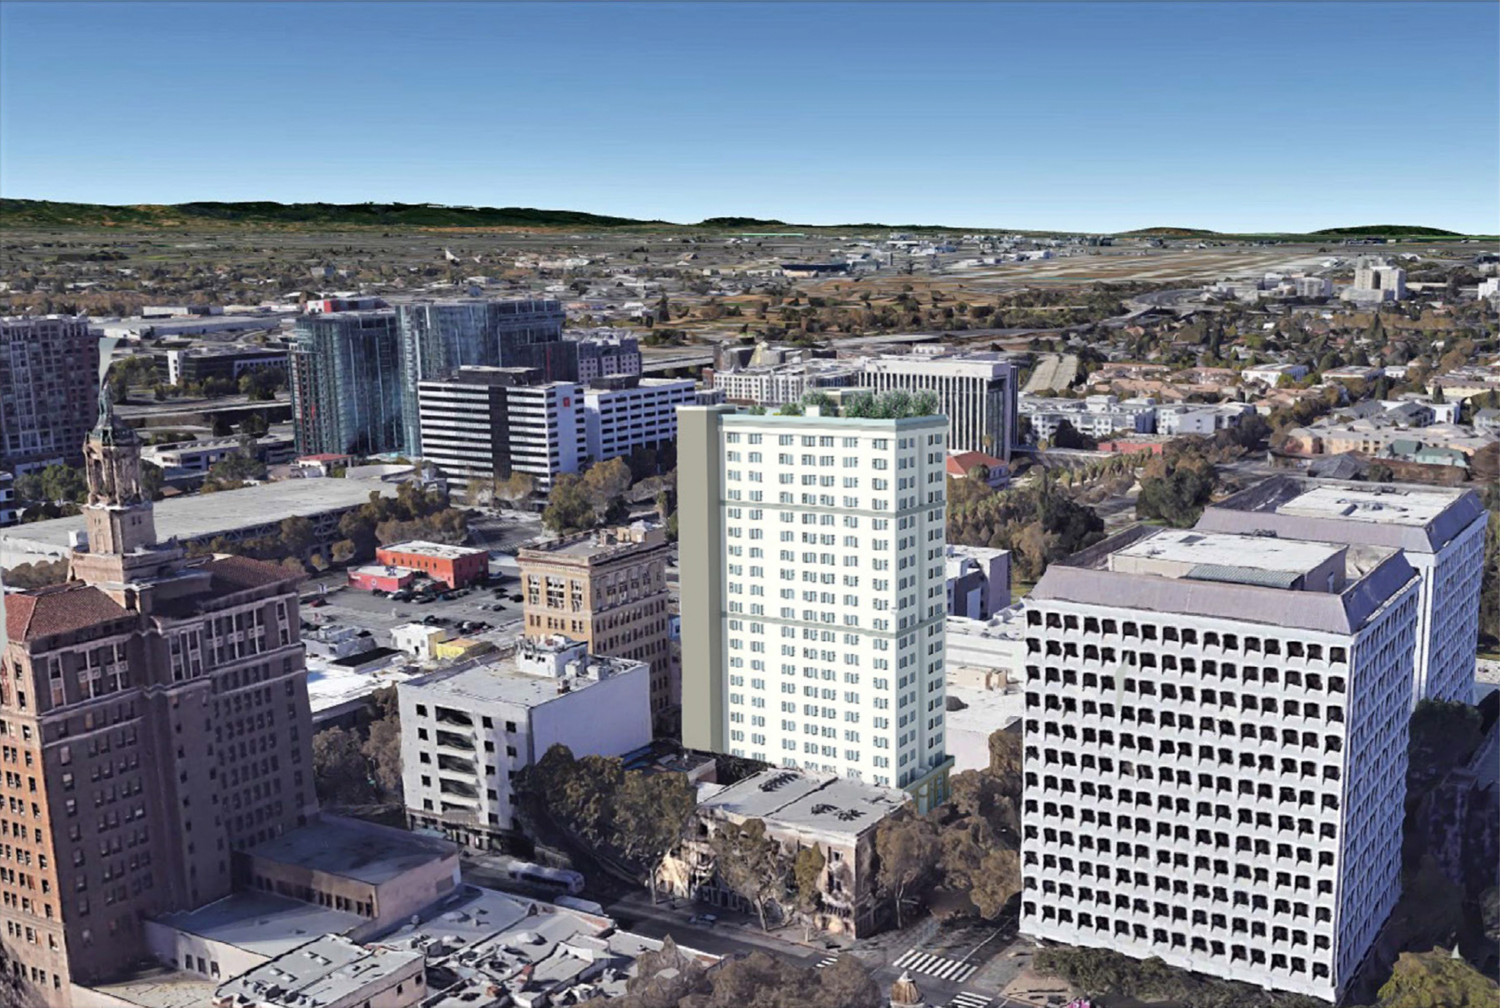 19 North 2nd Street aerial view, rendering by Anderson Architects